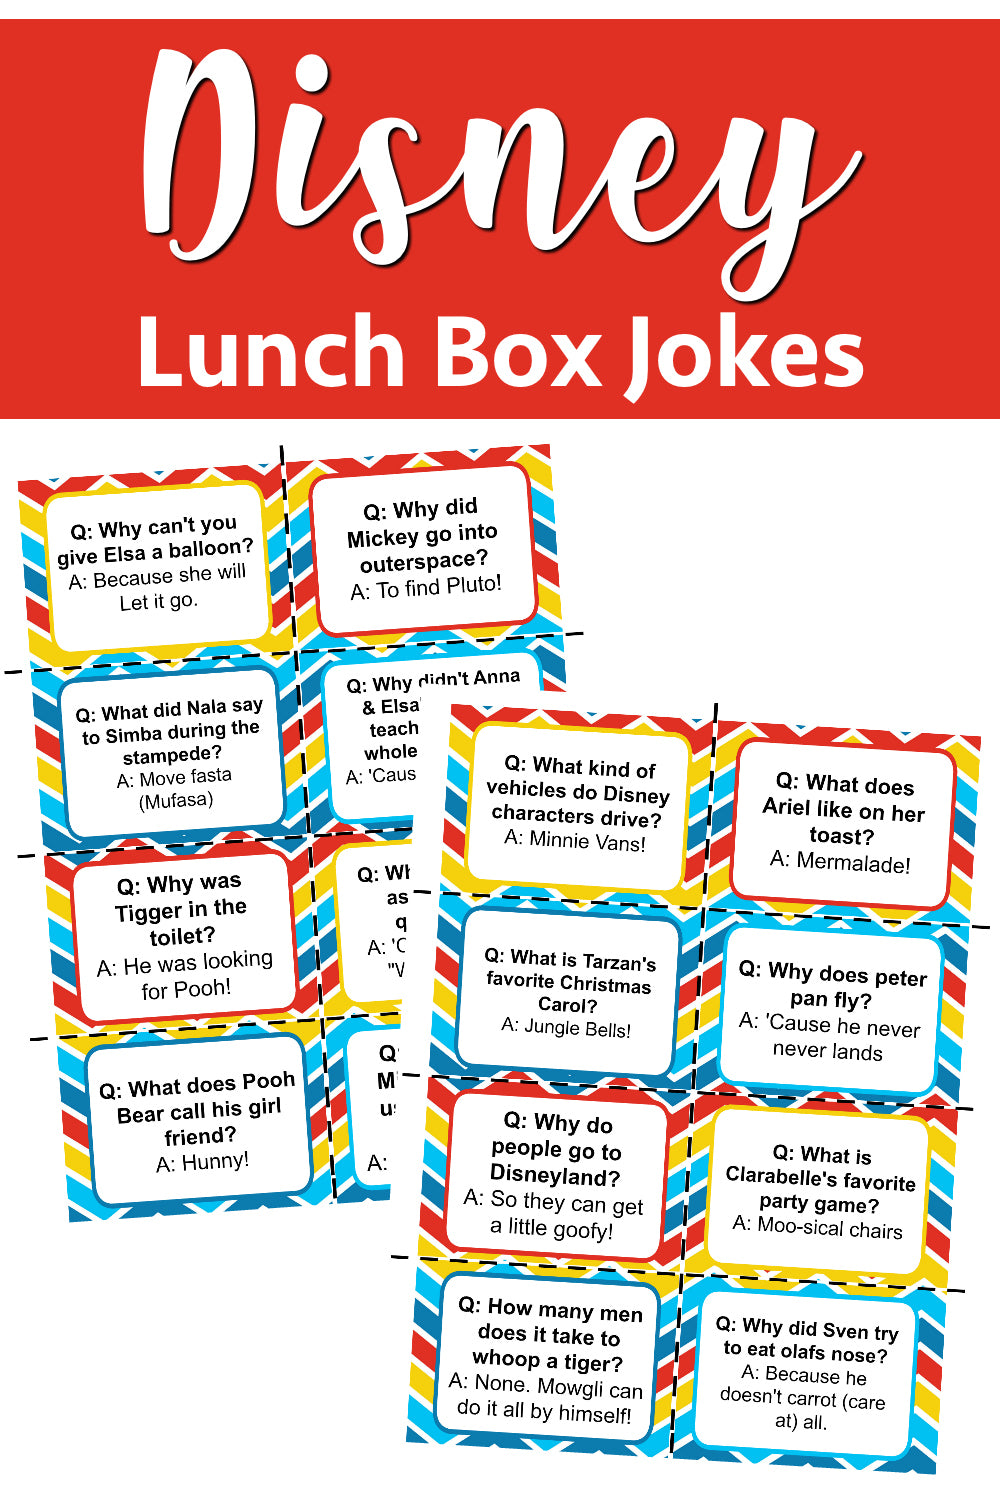 Lunch Box Notes and Jokes